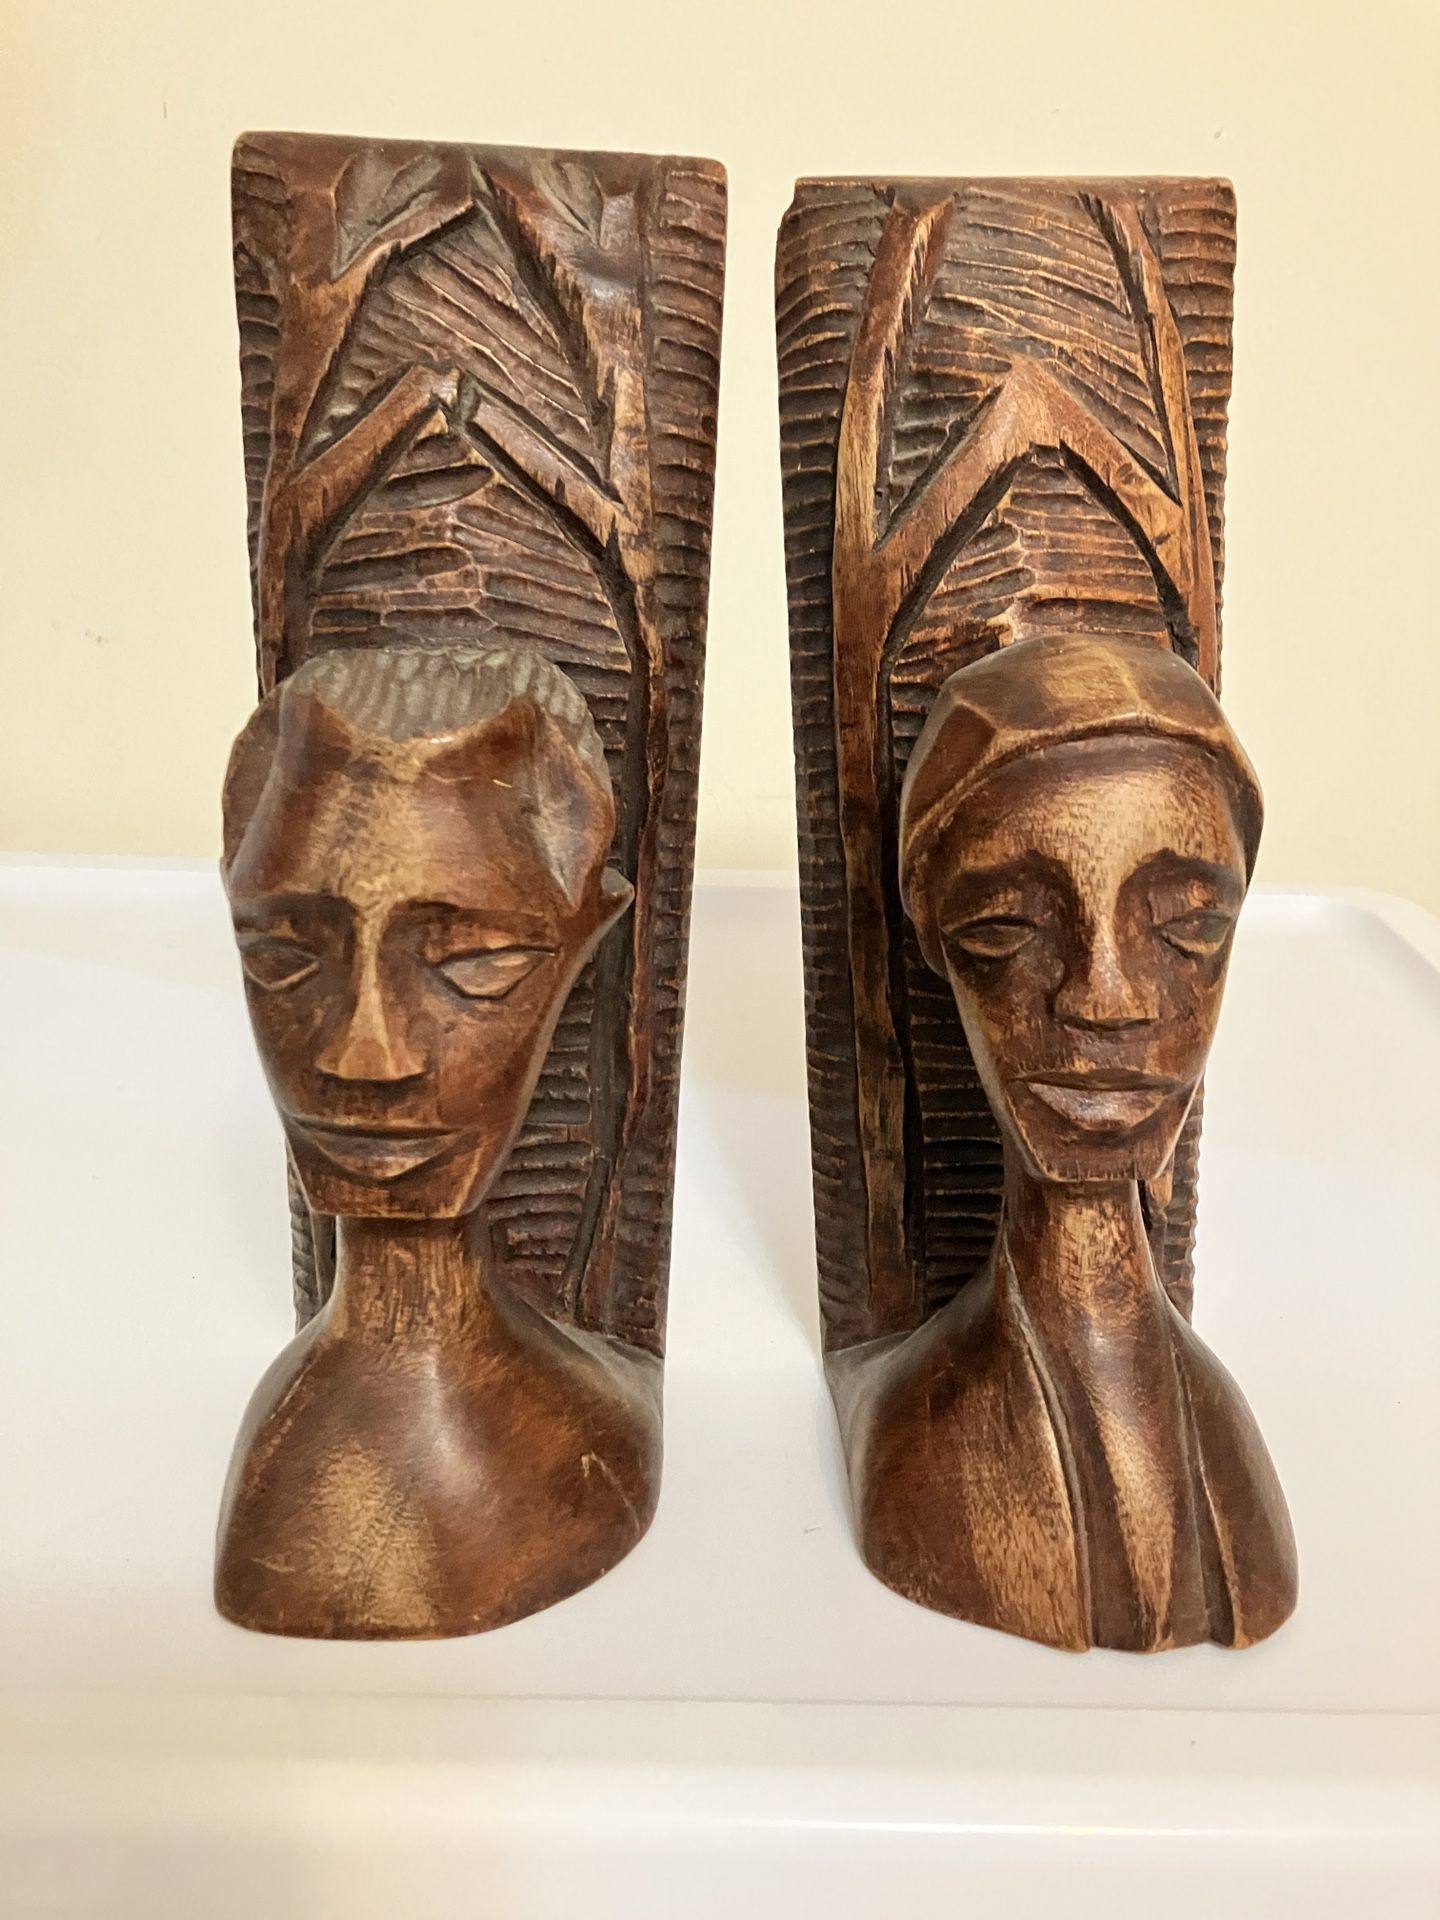 Vintage Wooden Hand Carved Tribal Art From Haiti